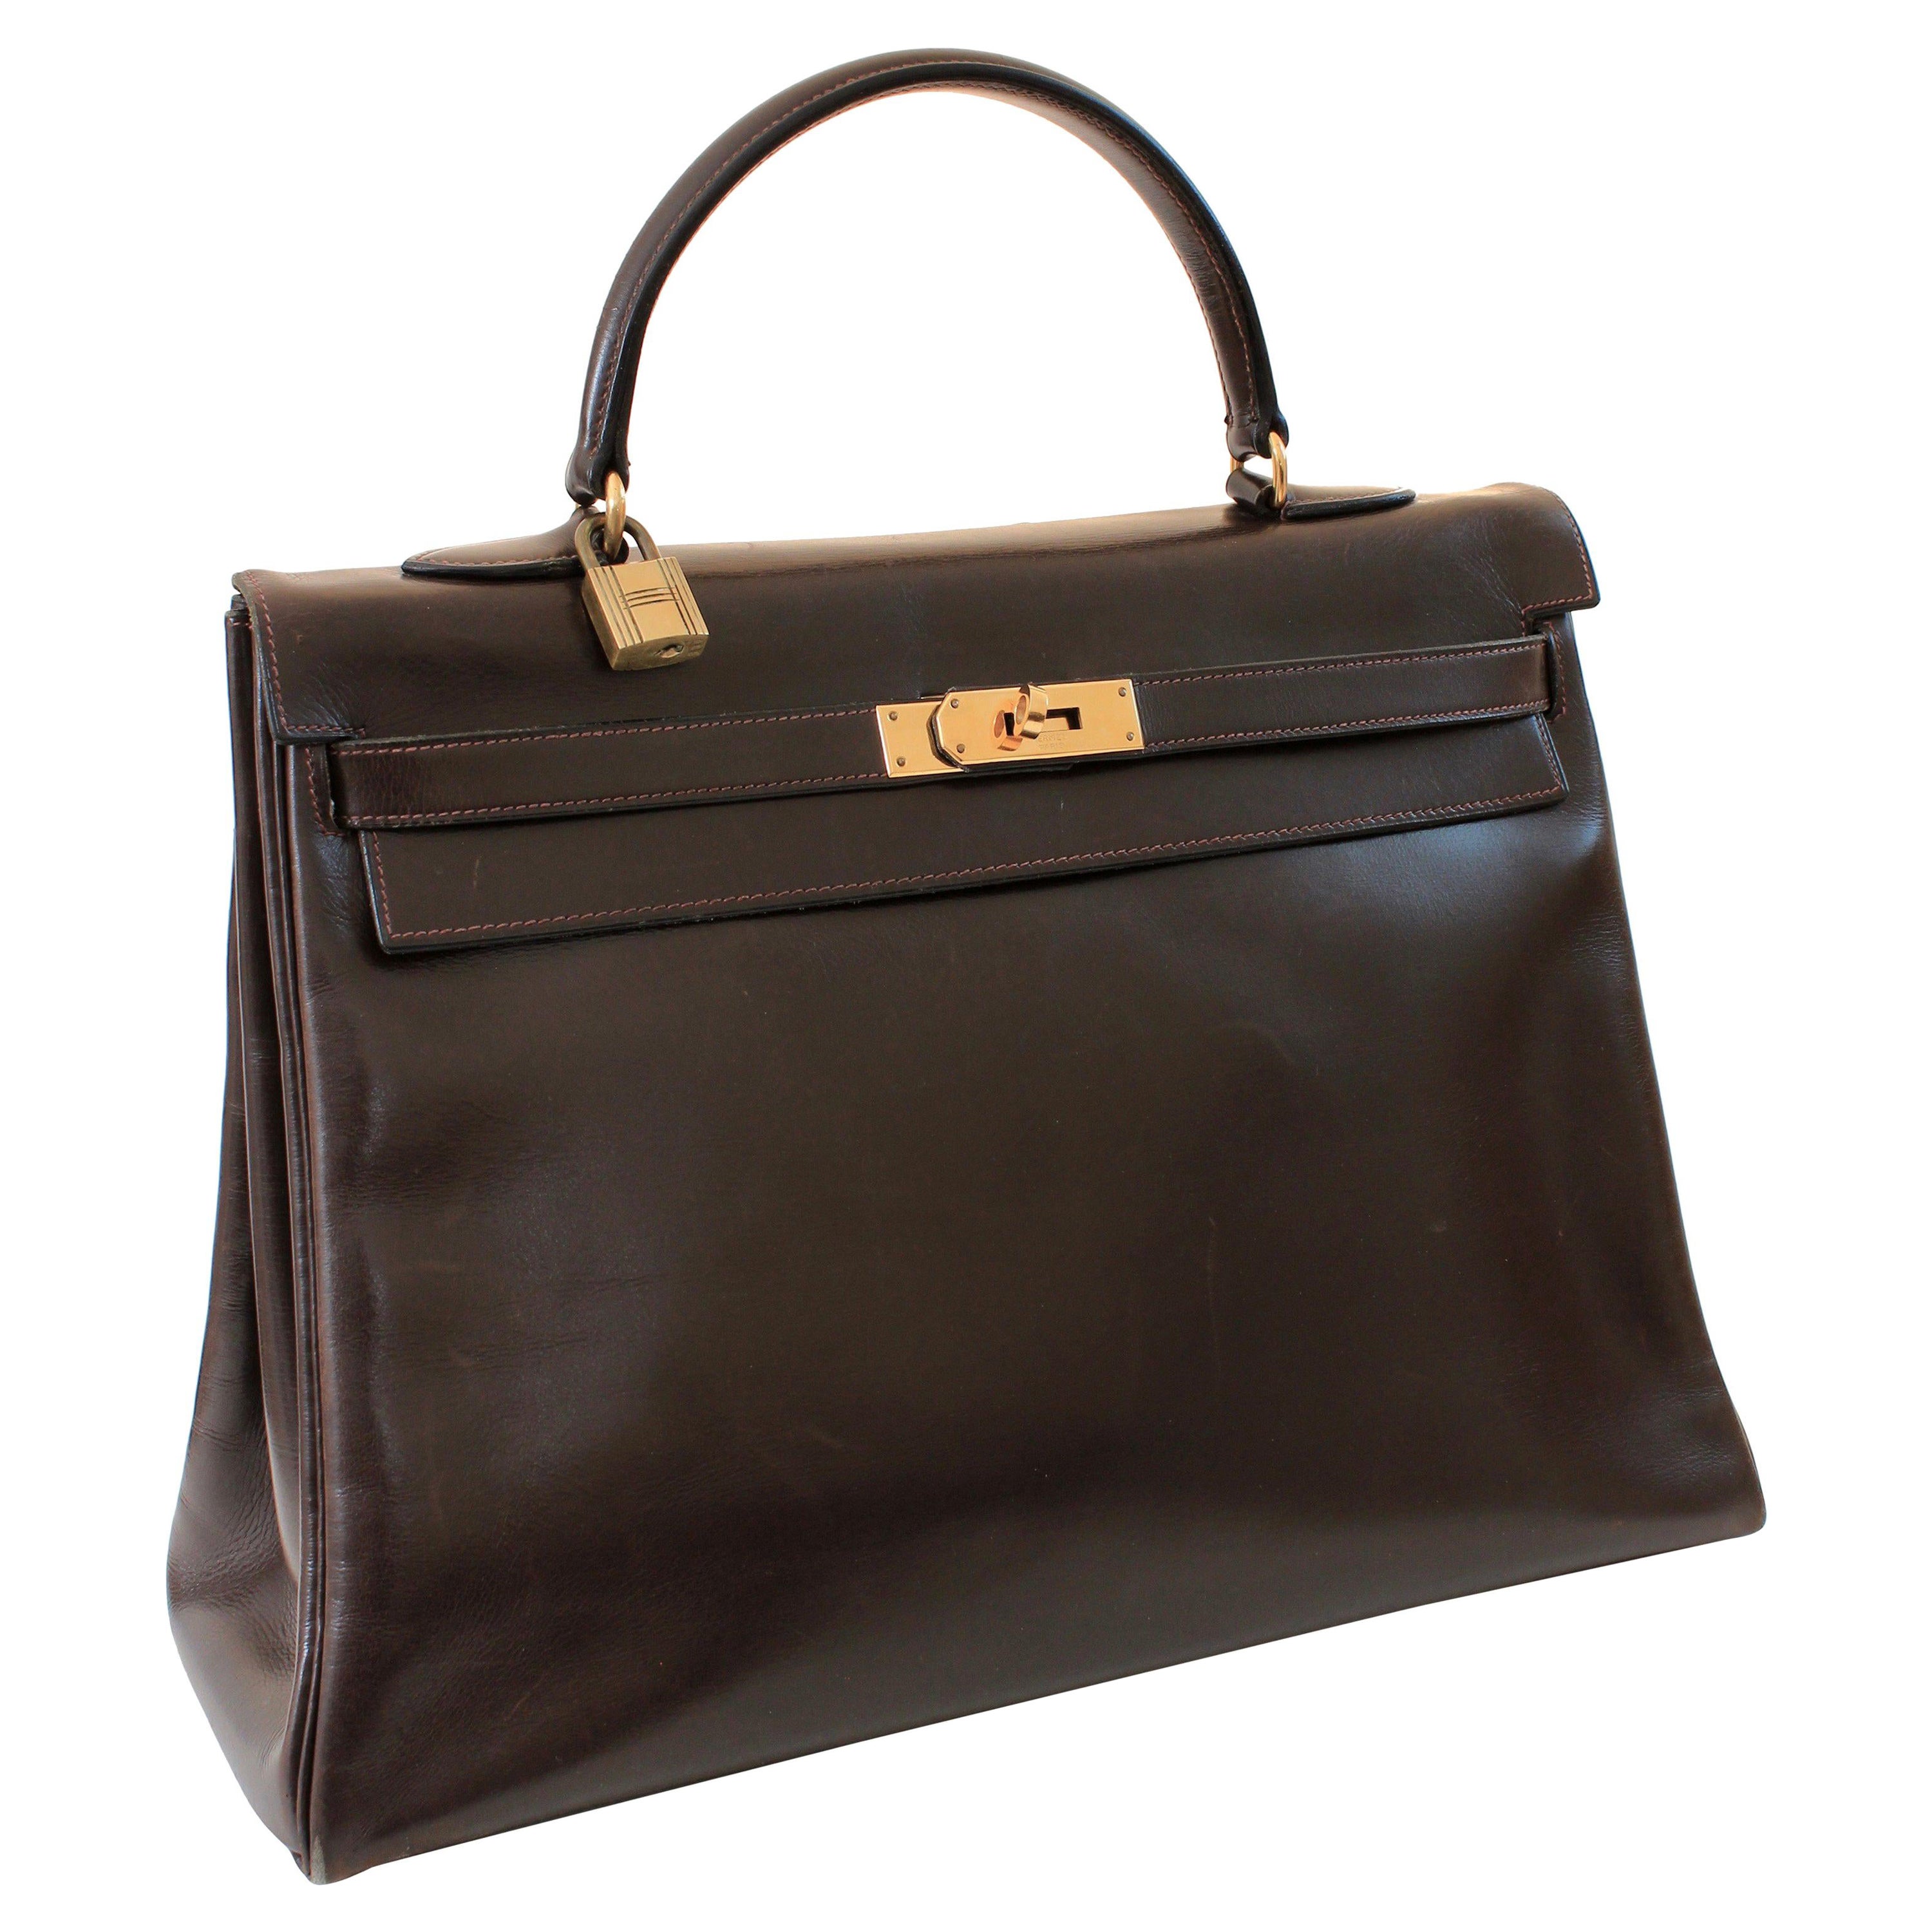 This fabulous handbag was made by Hermes in 1945.  Originally coined the Sac a Depeches - this piece was made about 12 years before Grace Kelly wore the style that we now know as the Kelly bag.  

Made from Hermes signature box leather in a deep